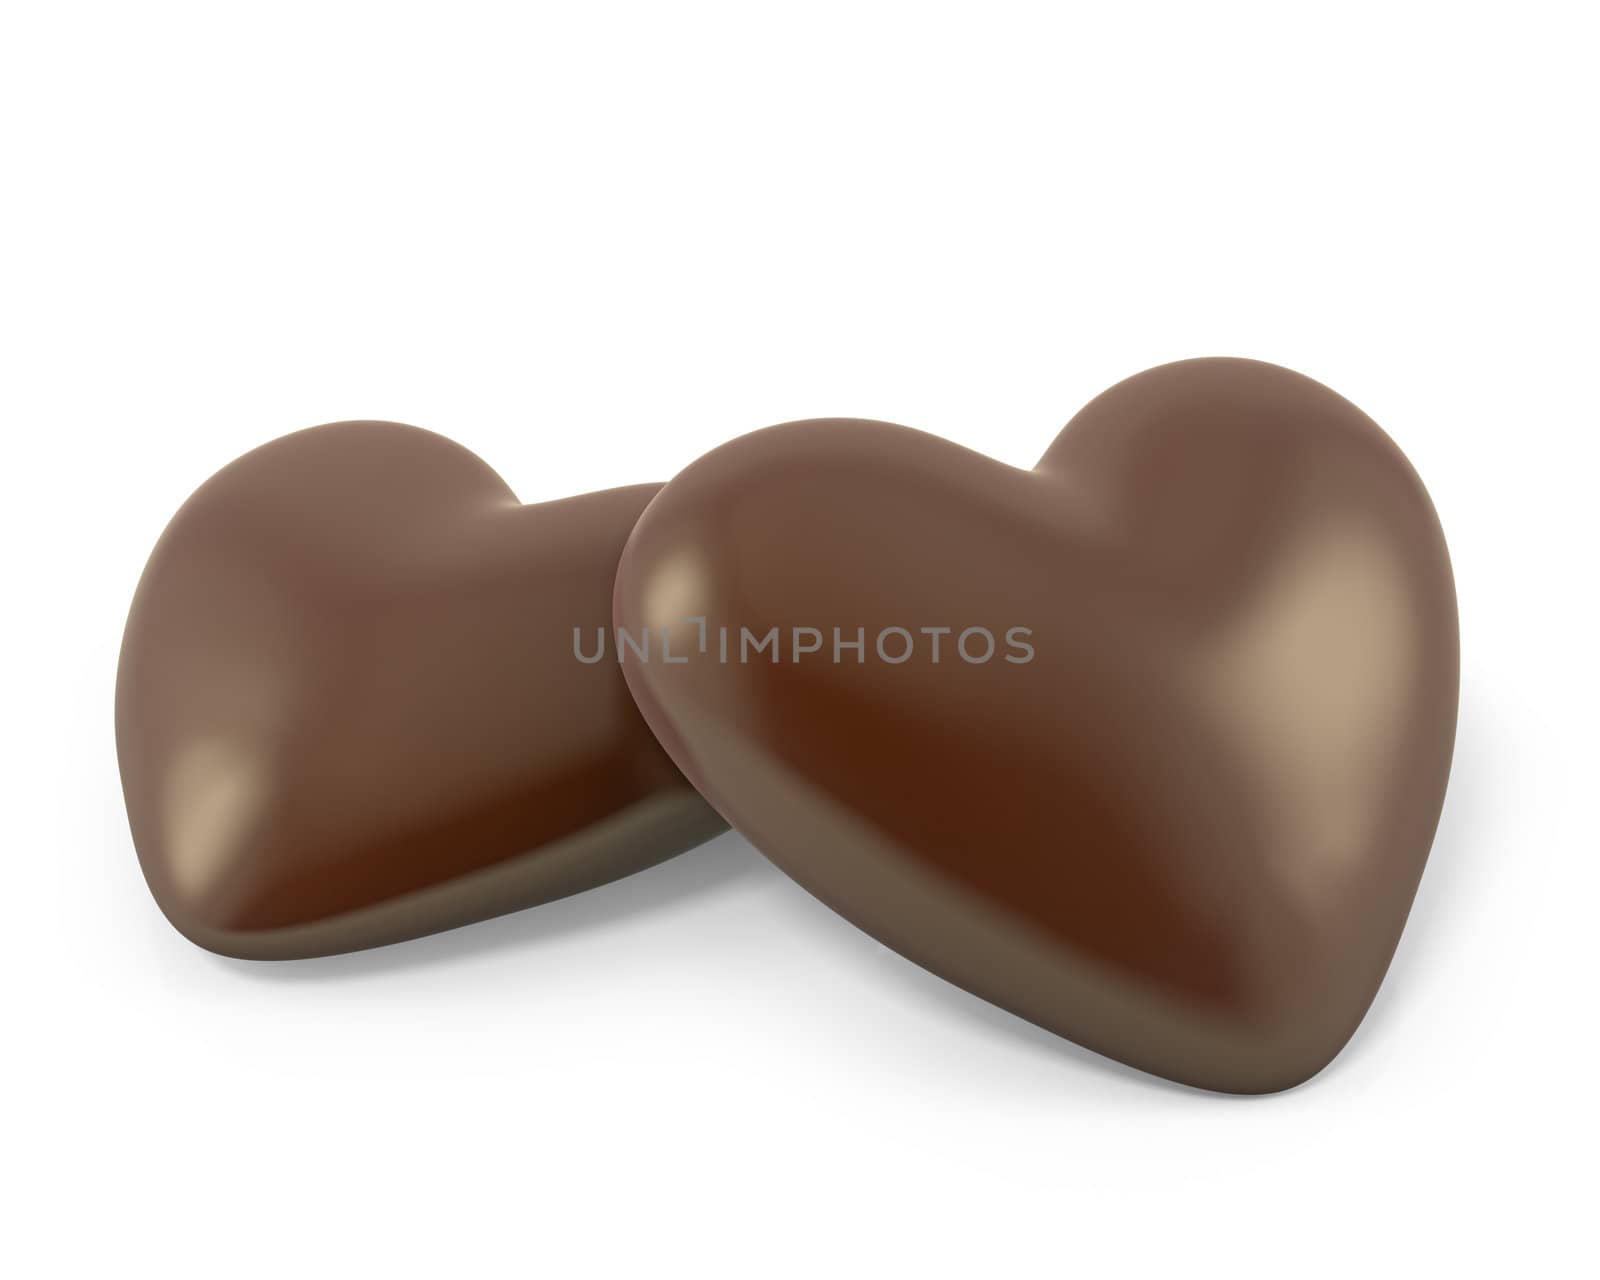 Pair of heart shaped chocolate candies isolated on white background